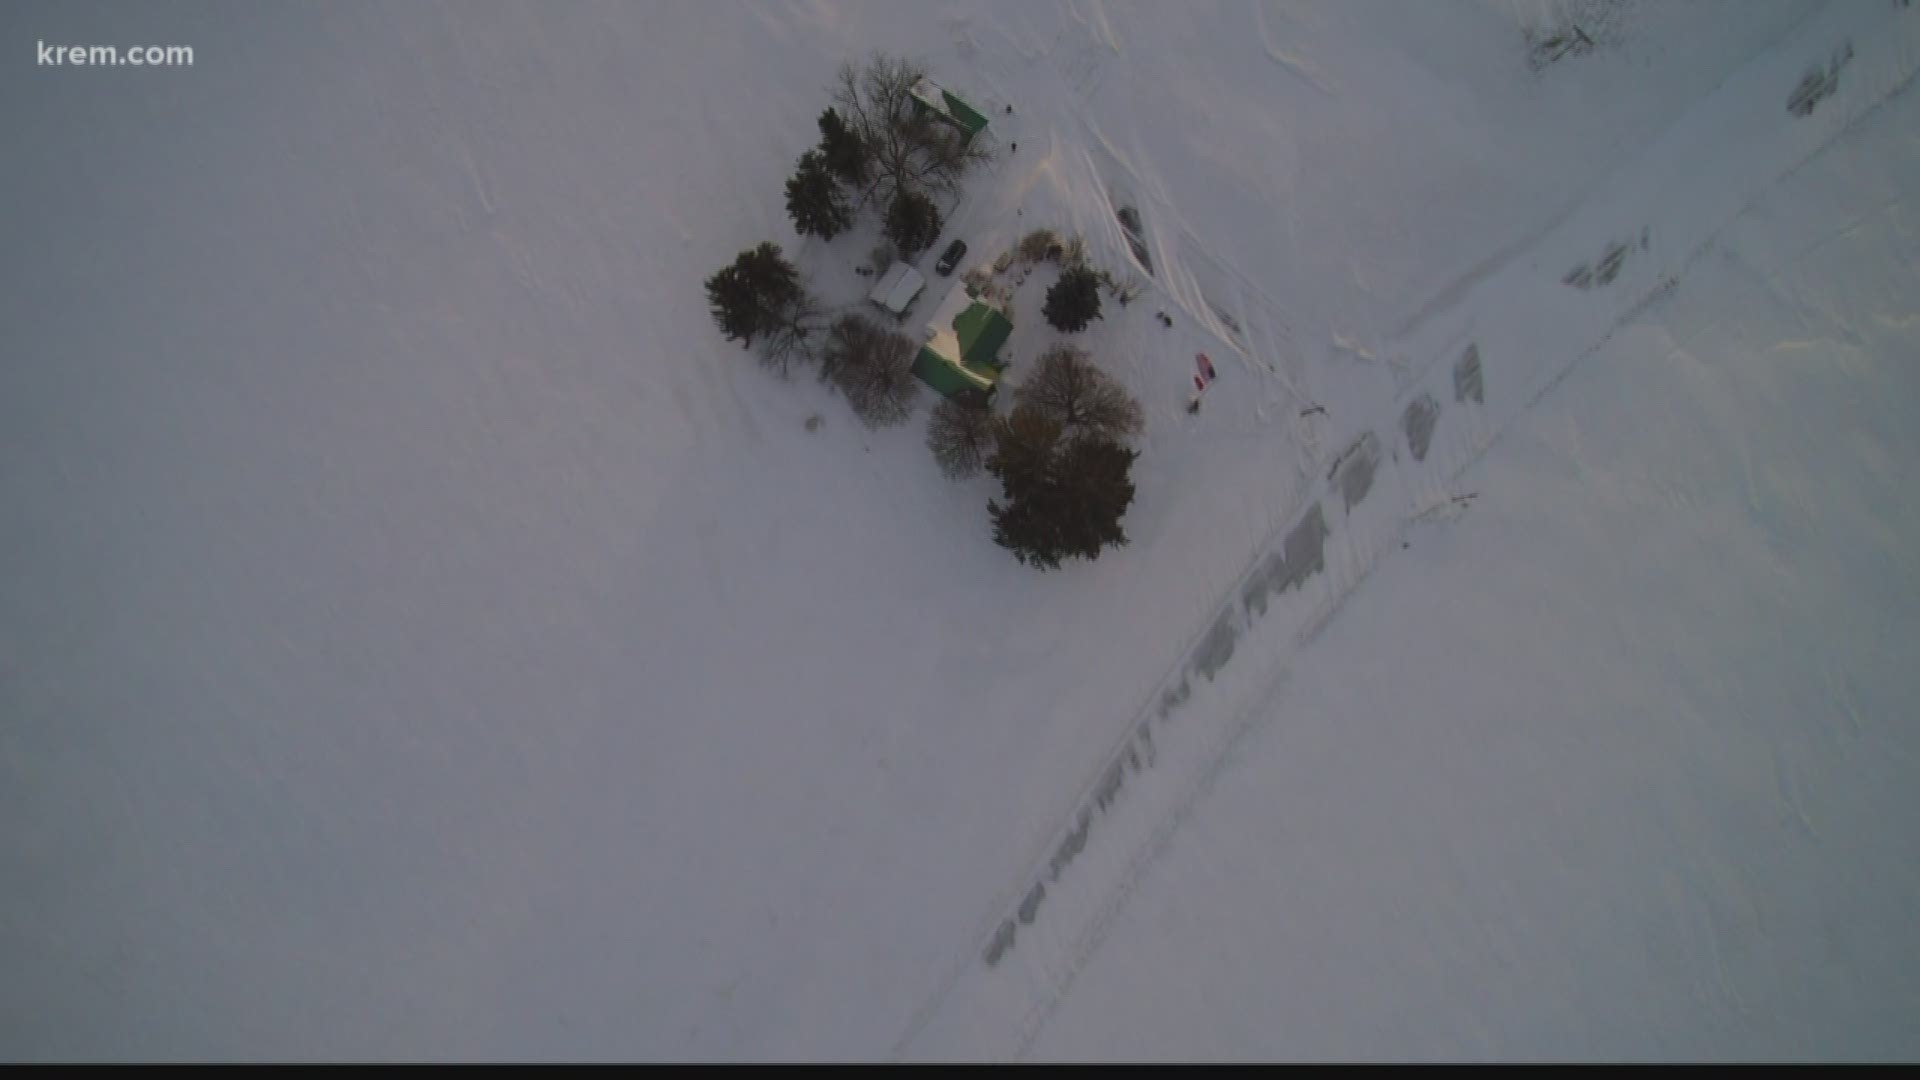 KREM Reporter Tim Pham spoke to farmers about the melting snow drifts in the area and the possibility of flooding.